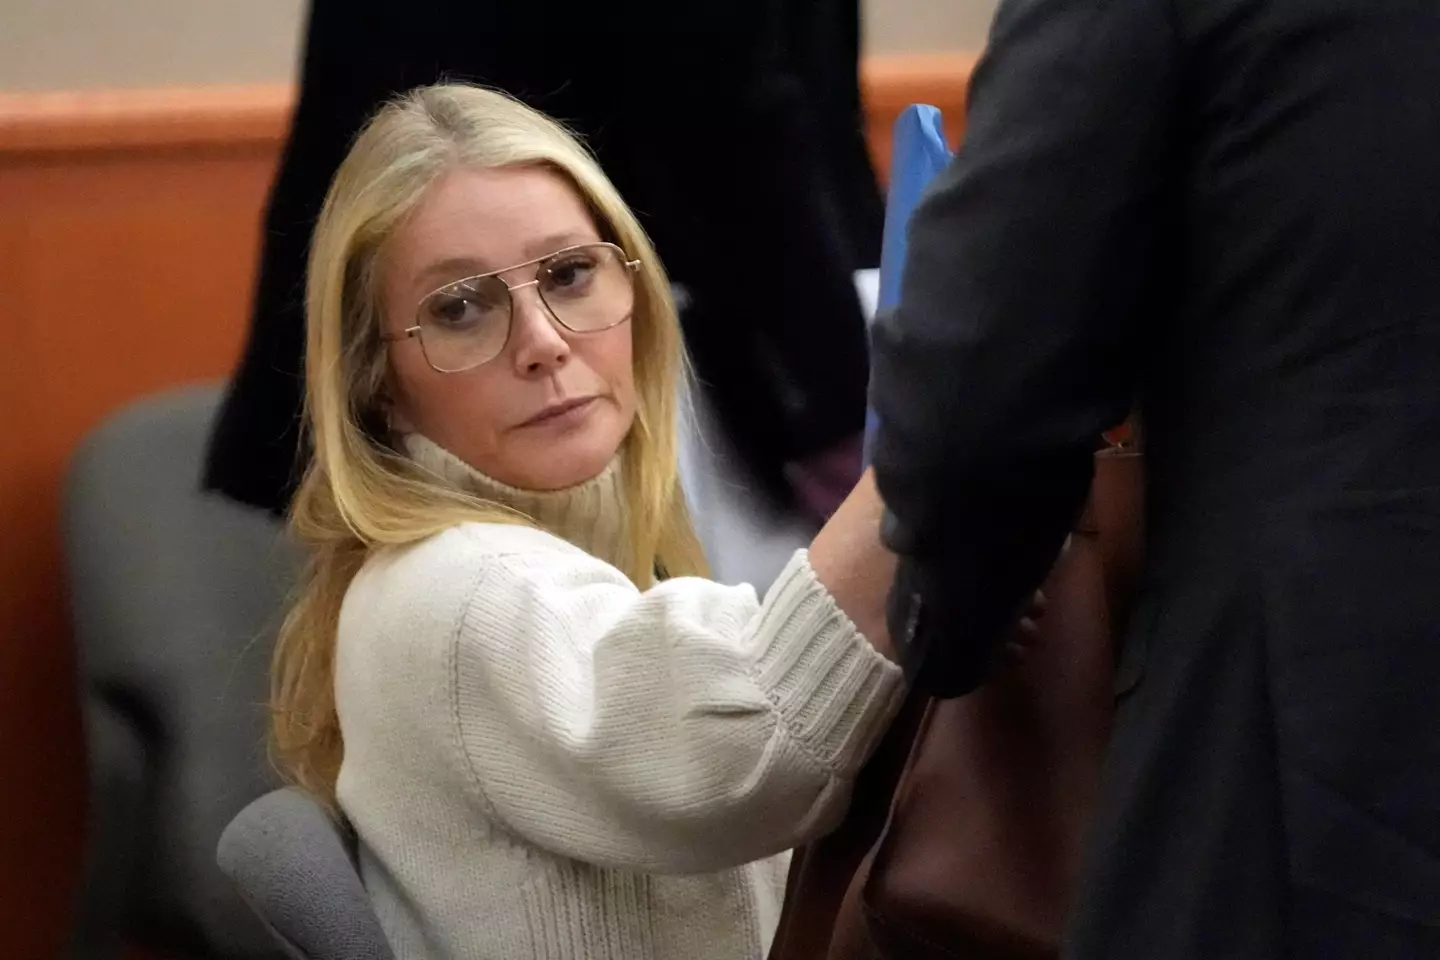 Gwyneth Paltrow has testified that a particular ski slope collision was a case of sexual assault.